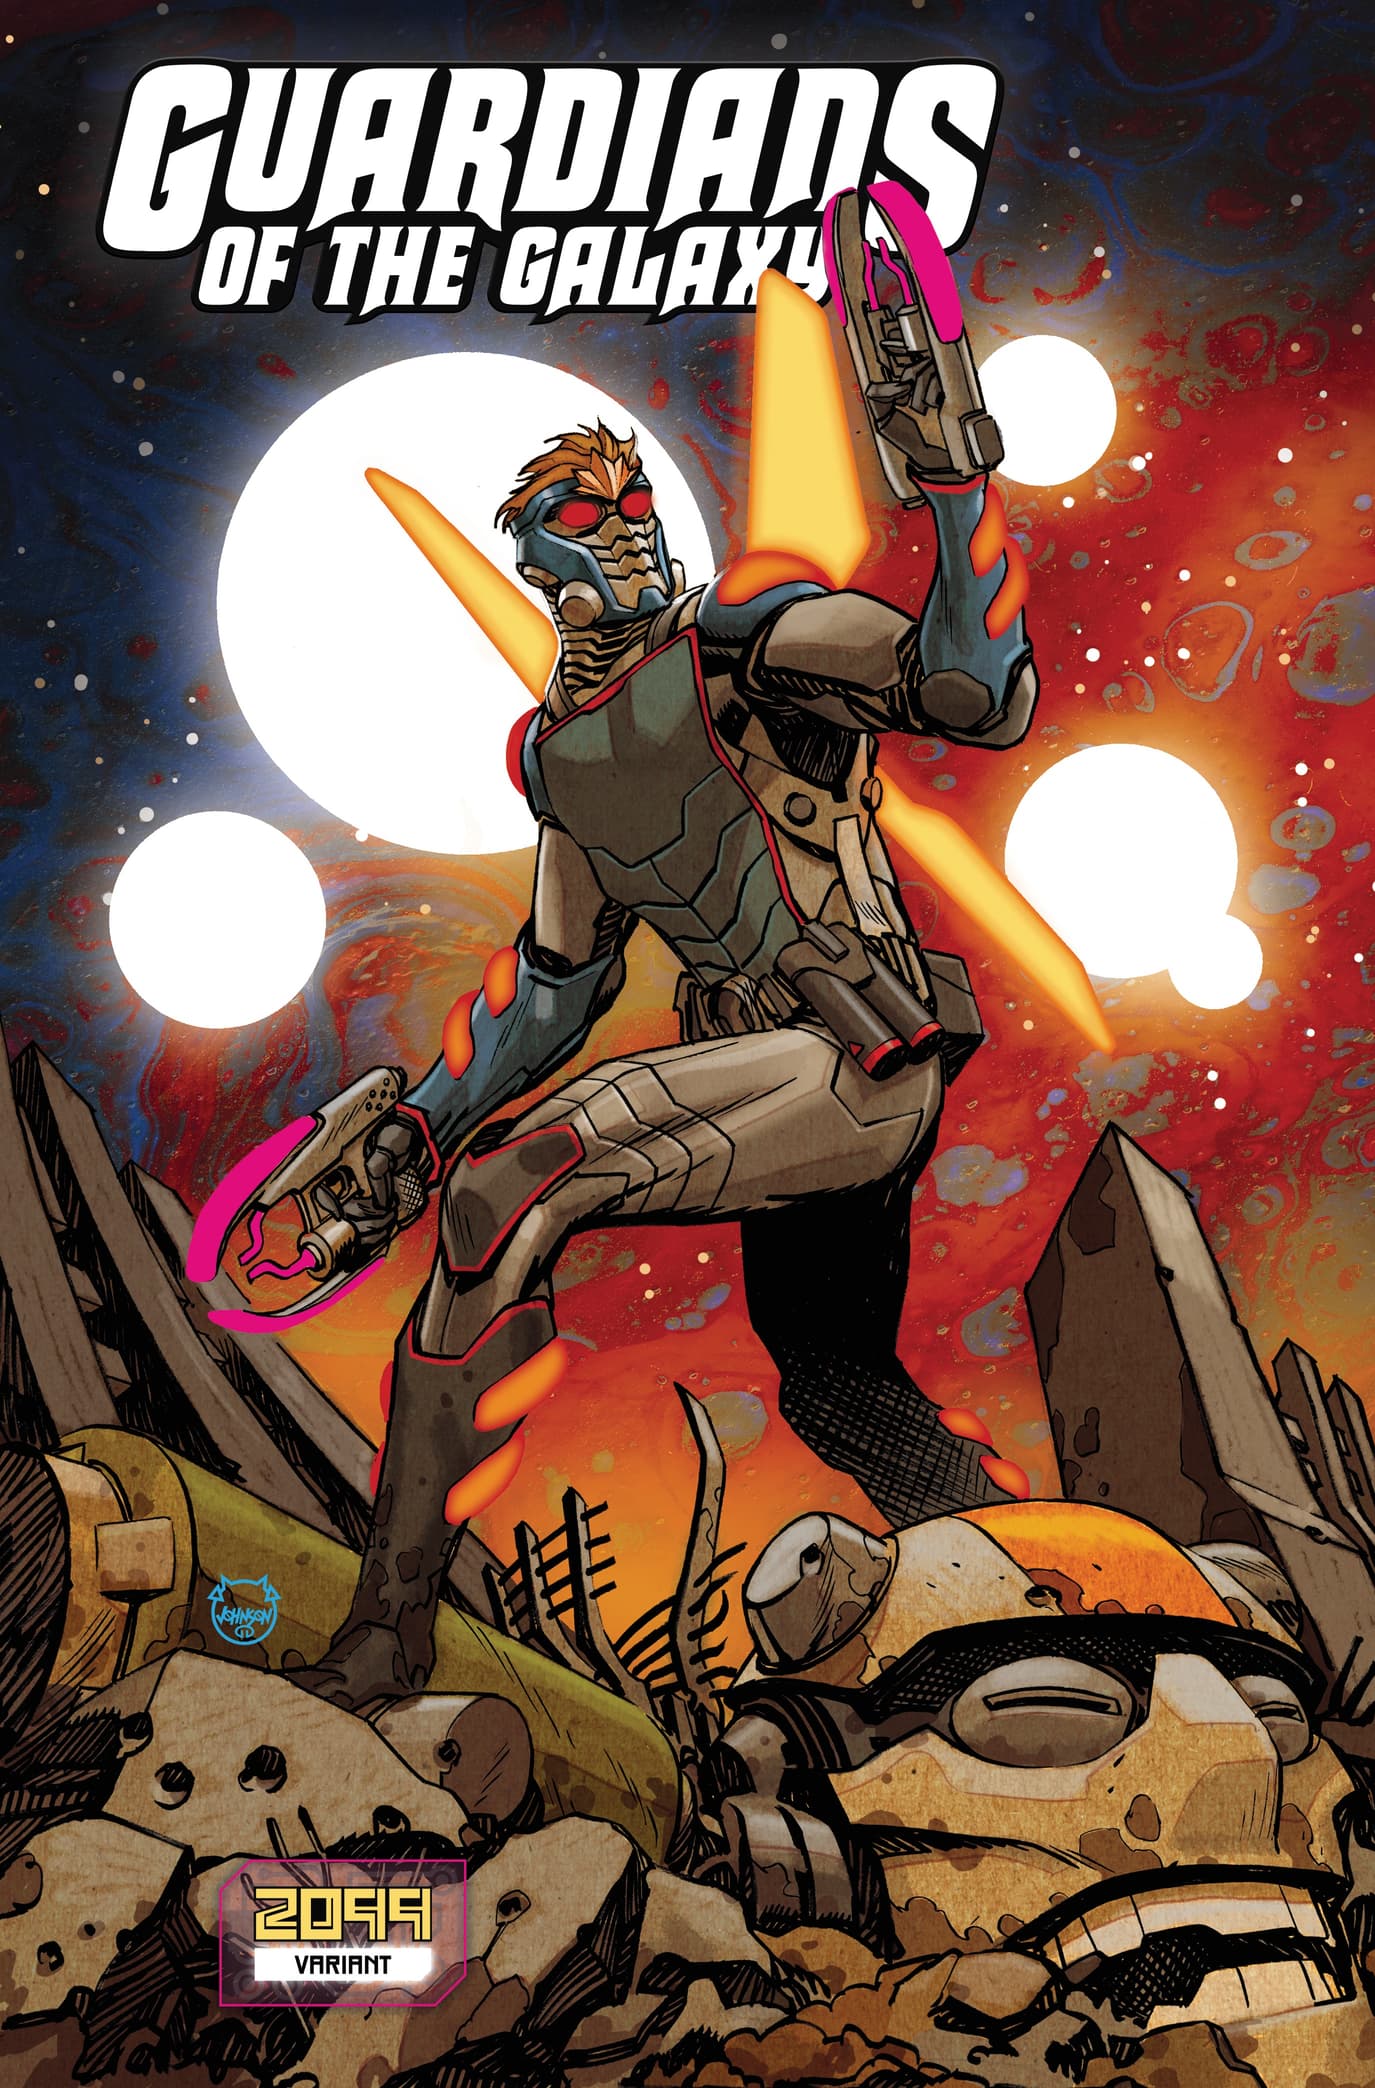 GUARDIANS OF THE GALAXY #11 variant art by Dave Johnson